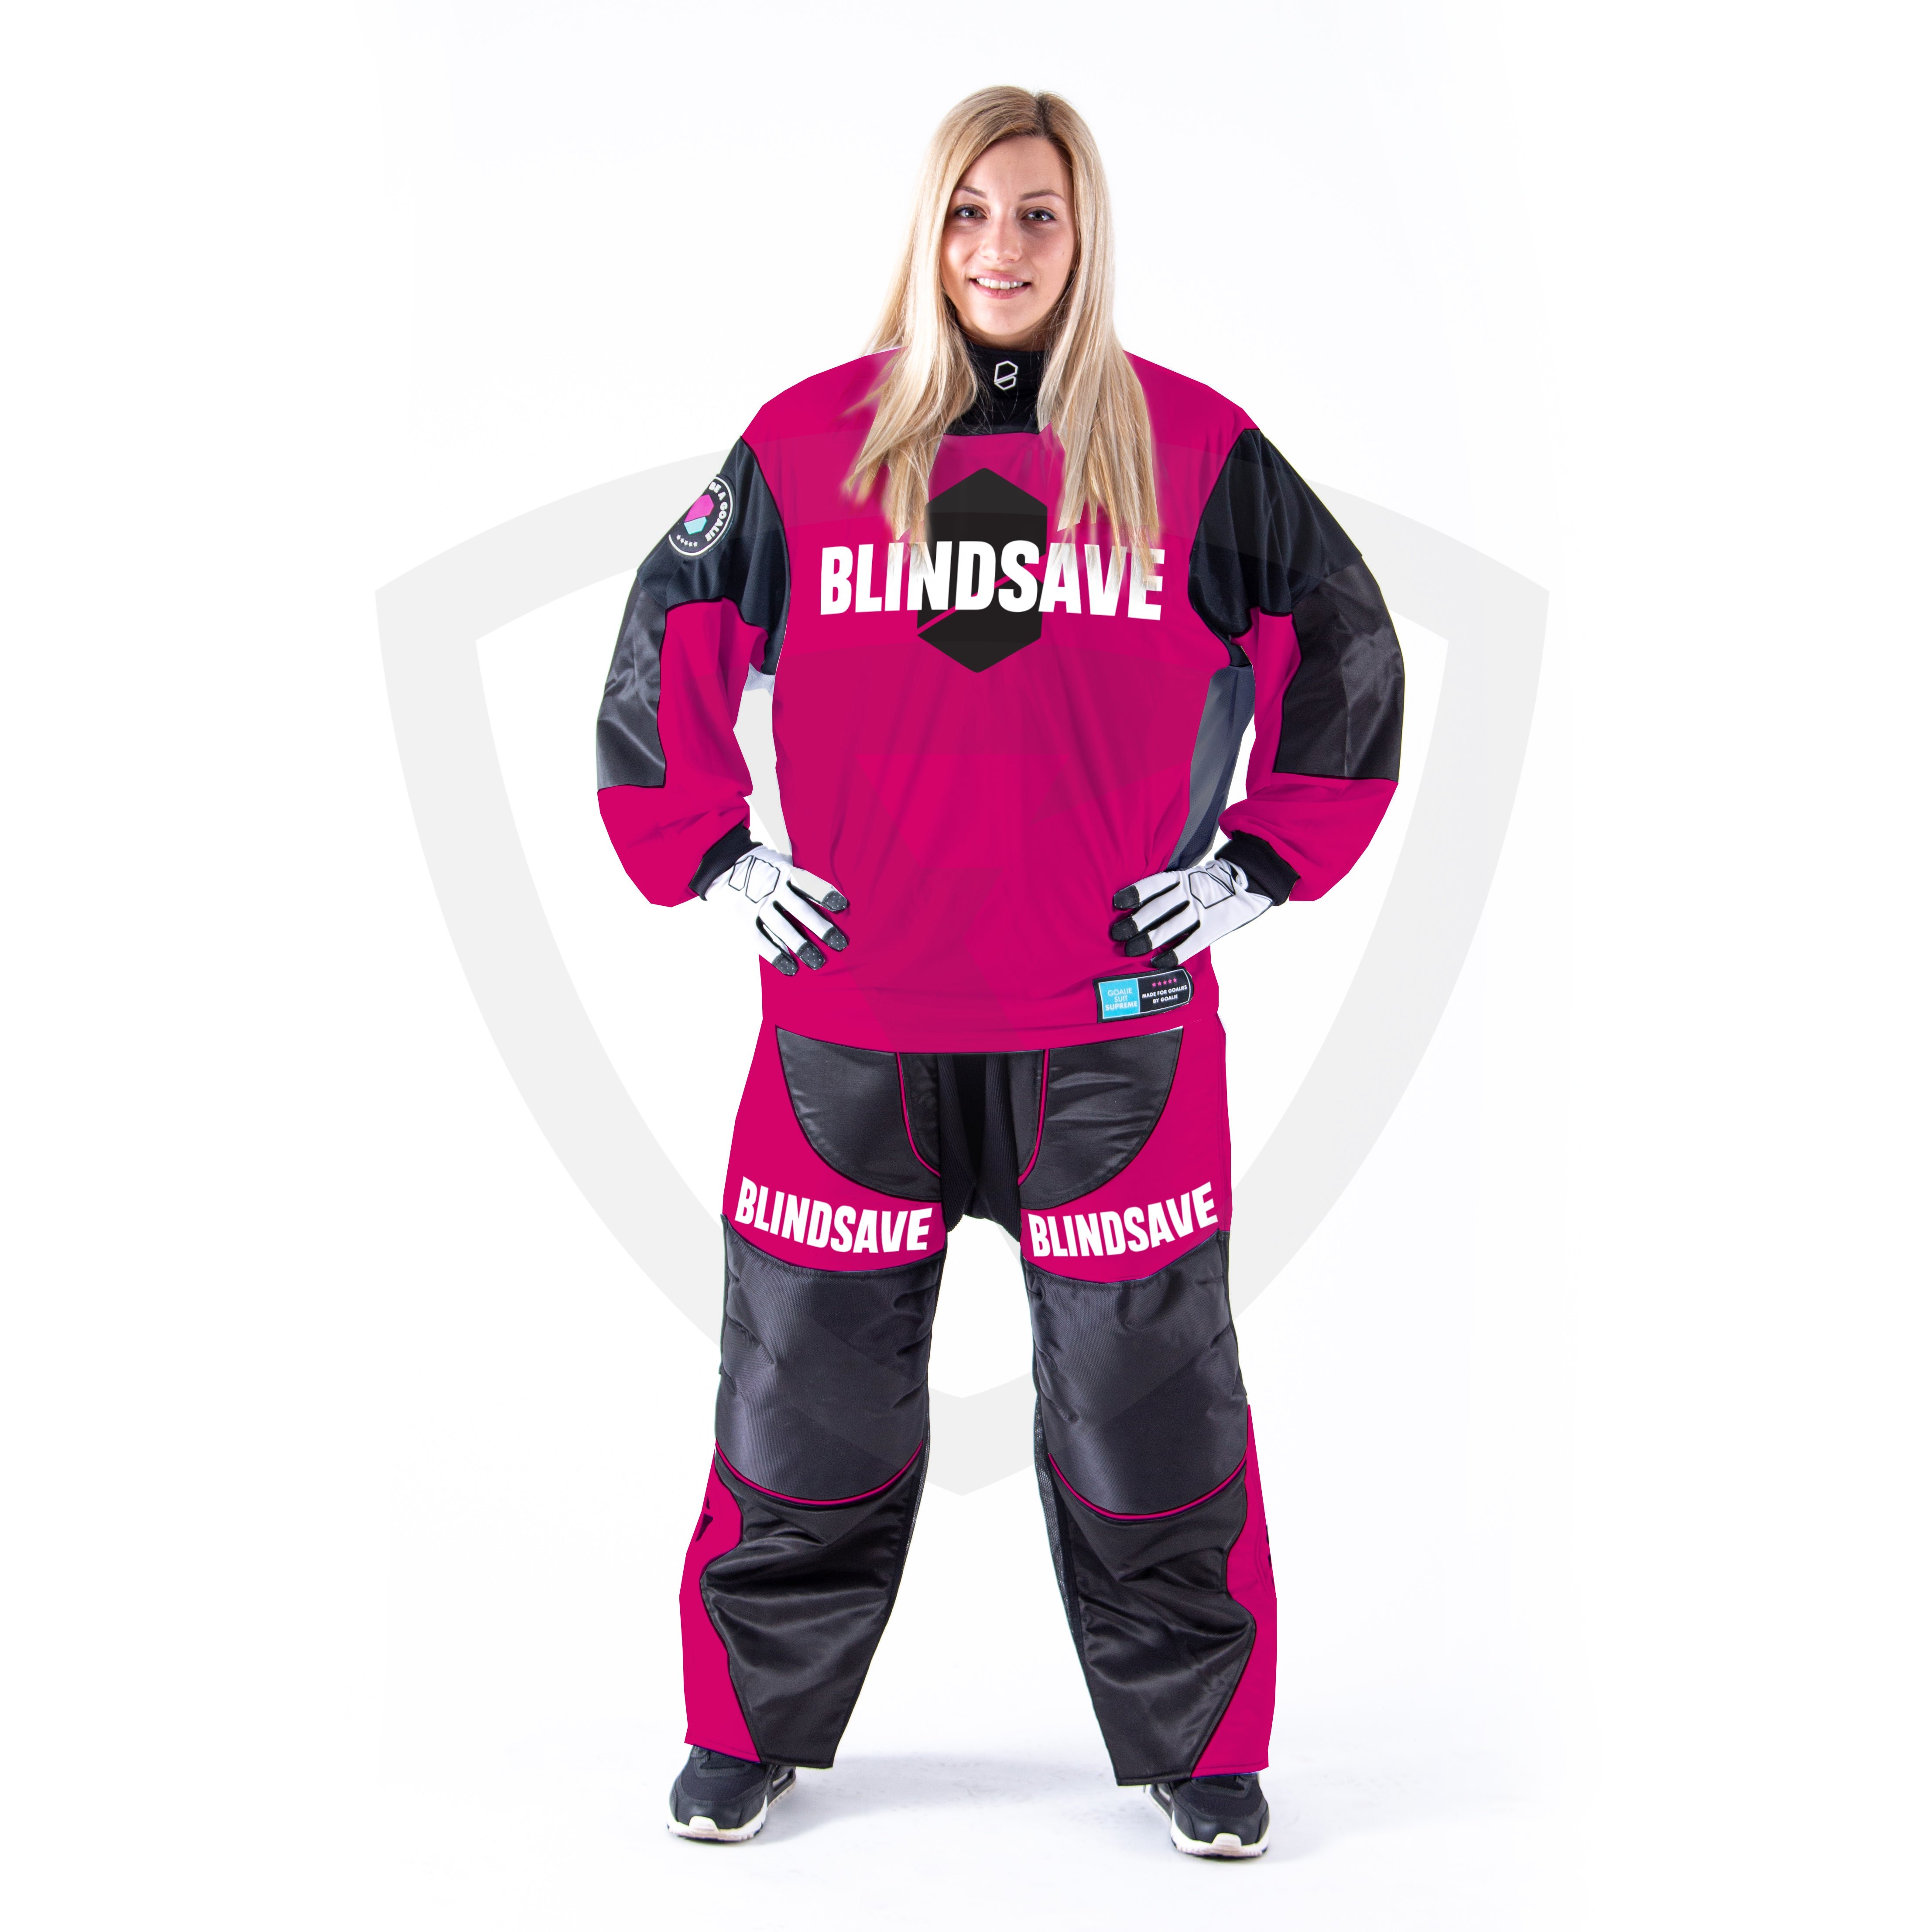 Blindsave SPECIAL VALENTINE Limited Edition Goalie Suit XS